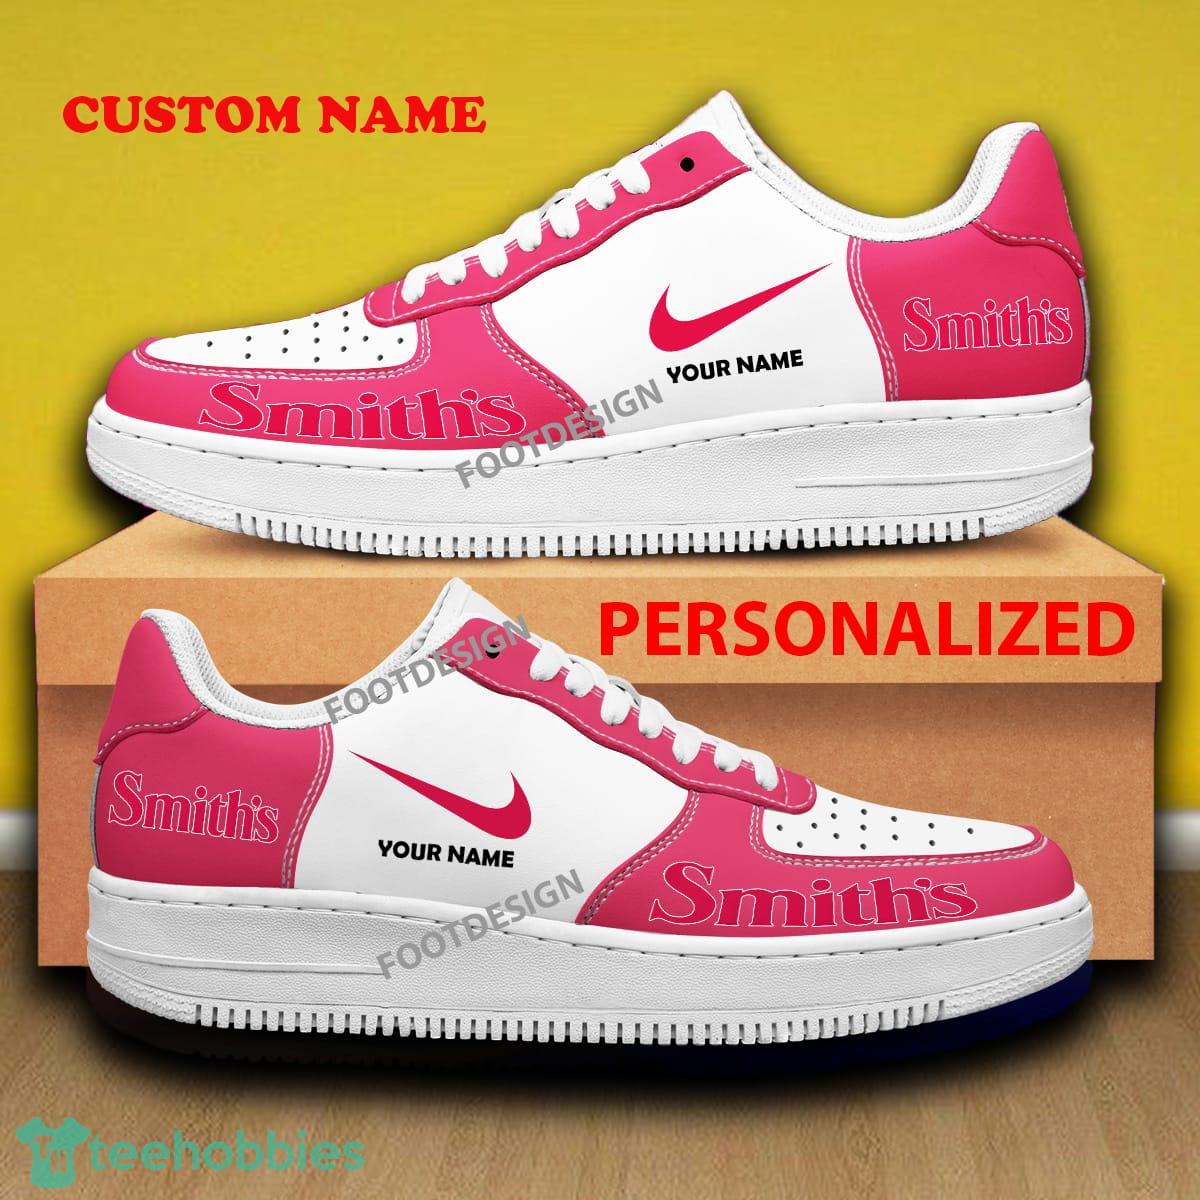 Custom Name Smith's Food And Drug Air Force 1 Sneakers Brand All Over Print Gift - Custom Name Smith's Food And Drug Air Force 1 Sneakers Brand All Over Print Gift